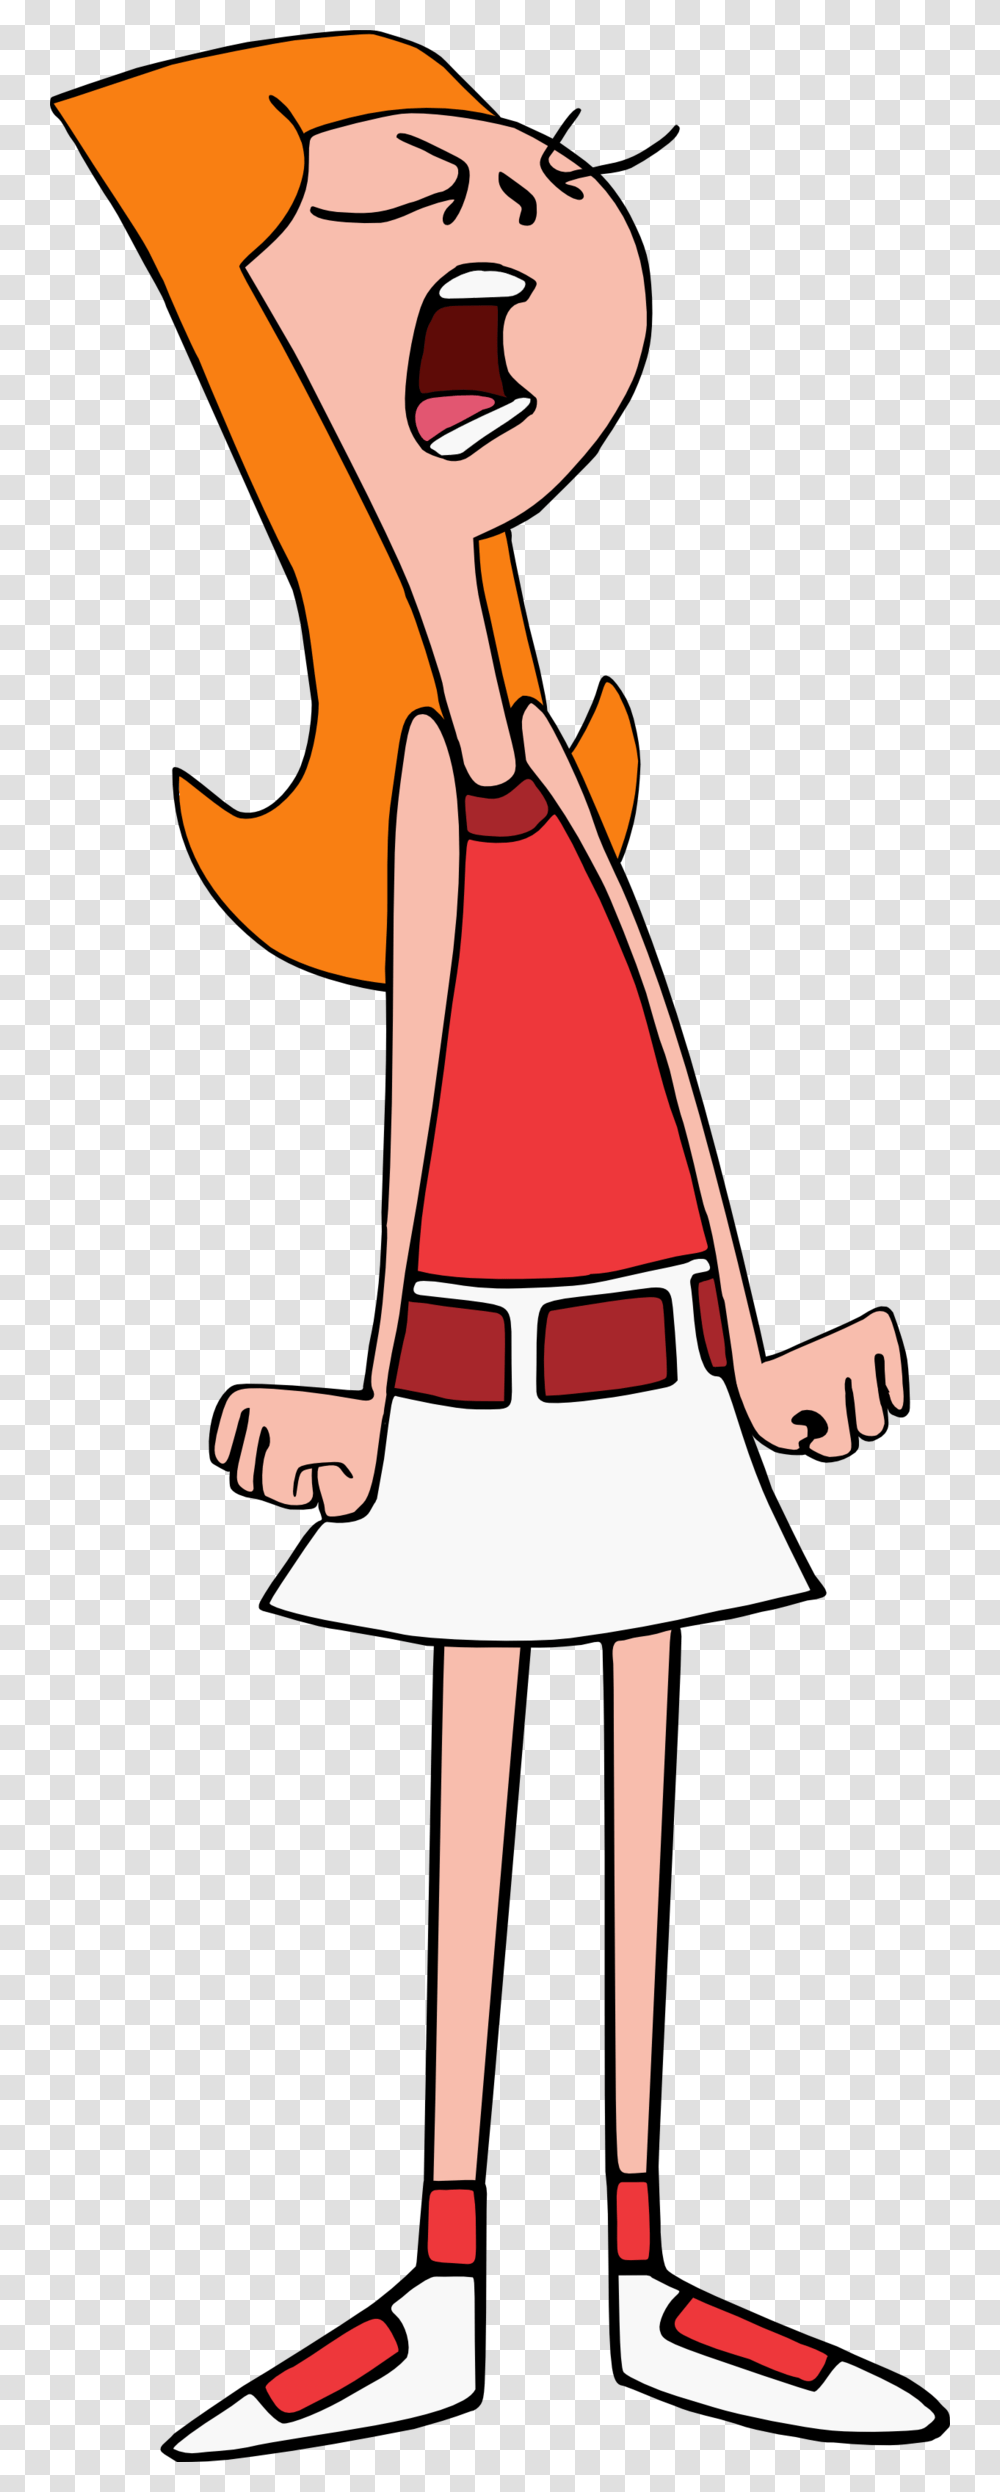 Candace From Phineas And Ferb Yelling, Coat, Bow, Outdoors Transparent Png